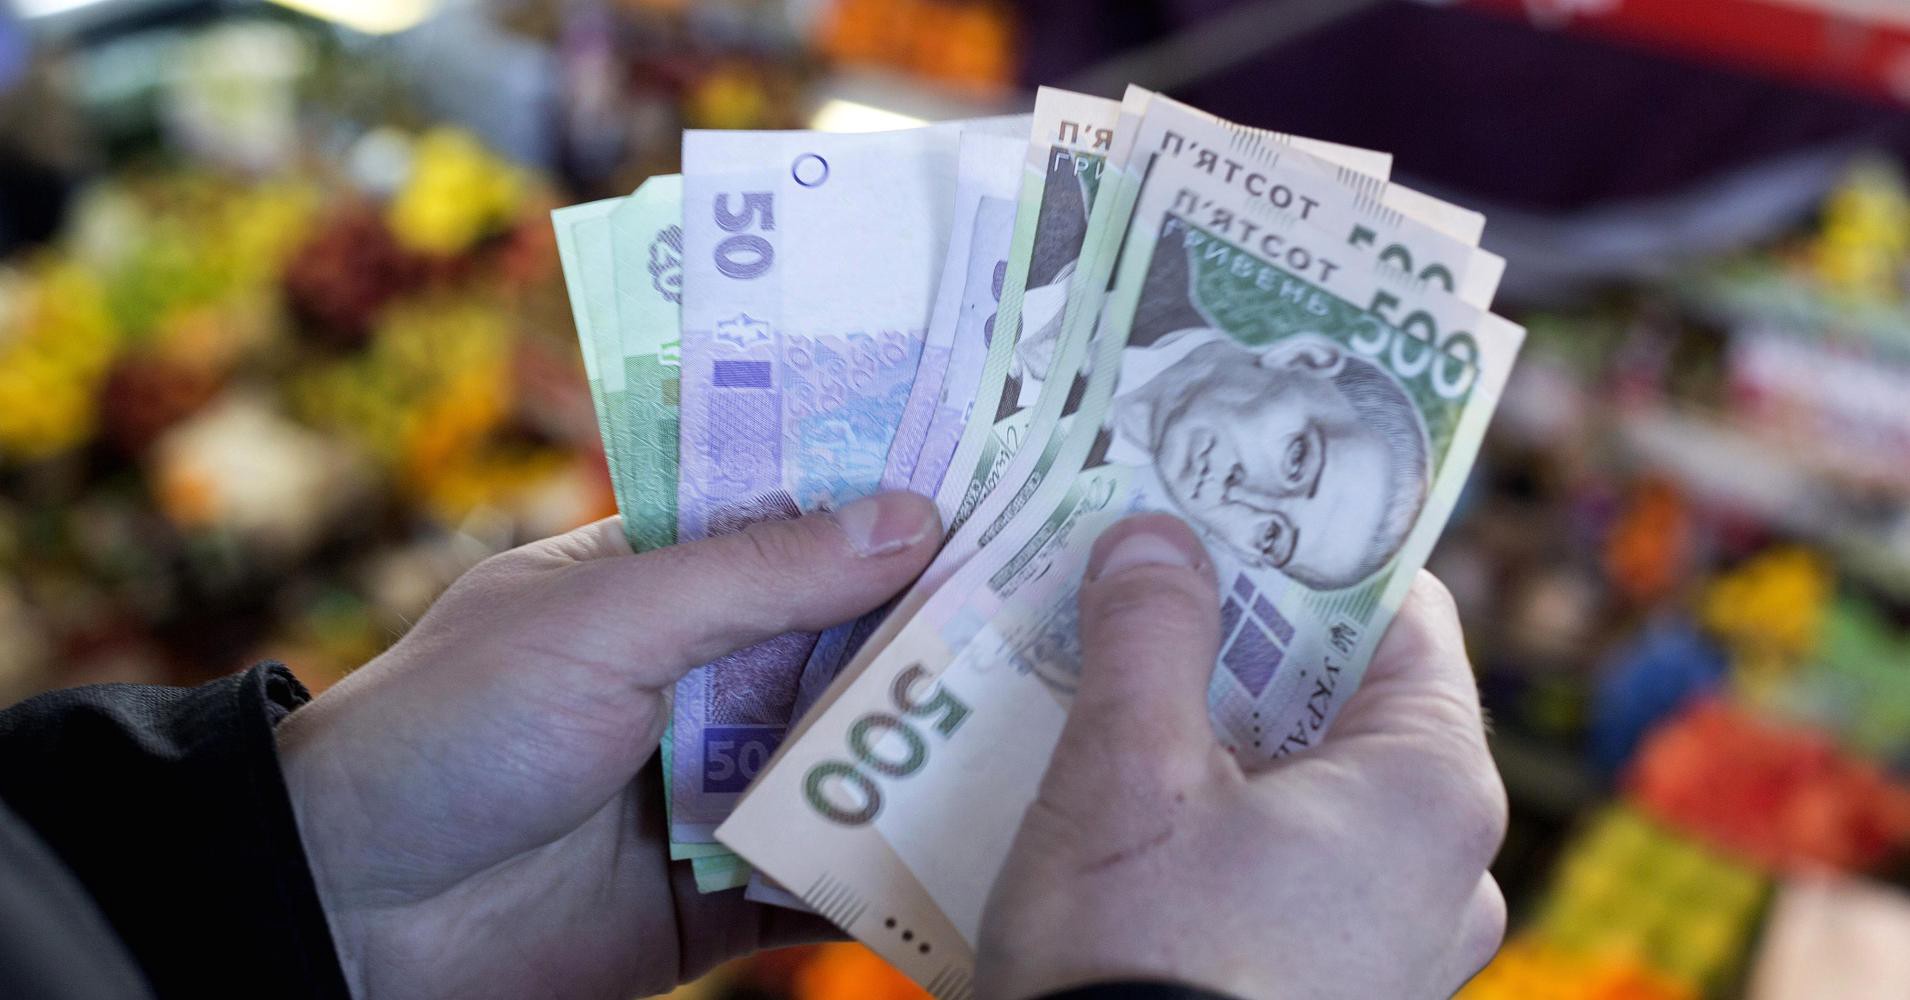 After the Weekend, the Dollar Exchange Rate in Ukraine Changed